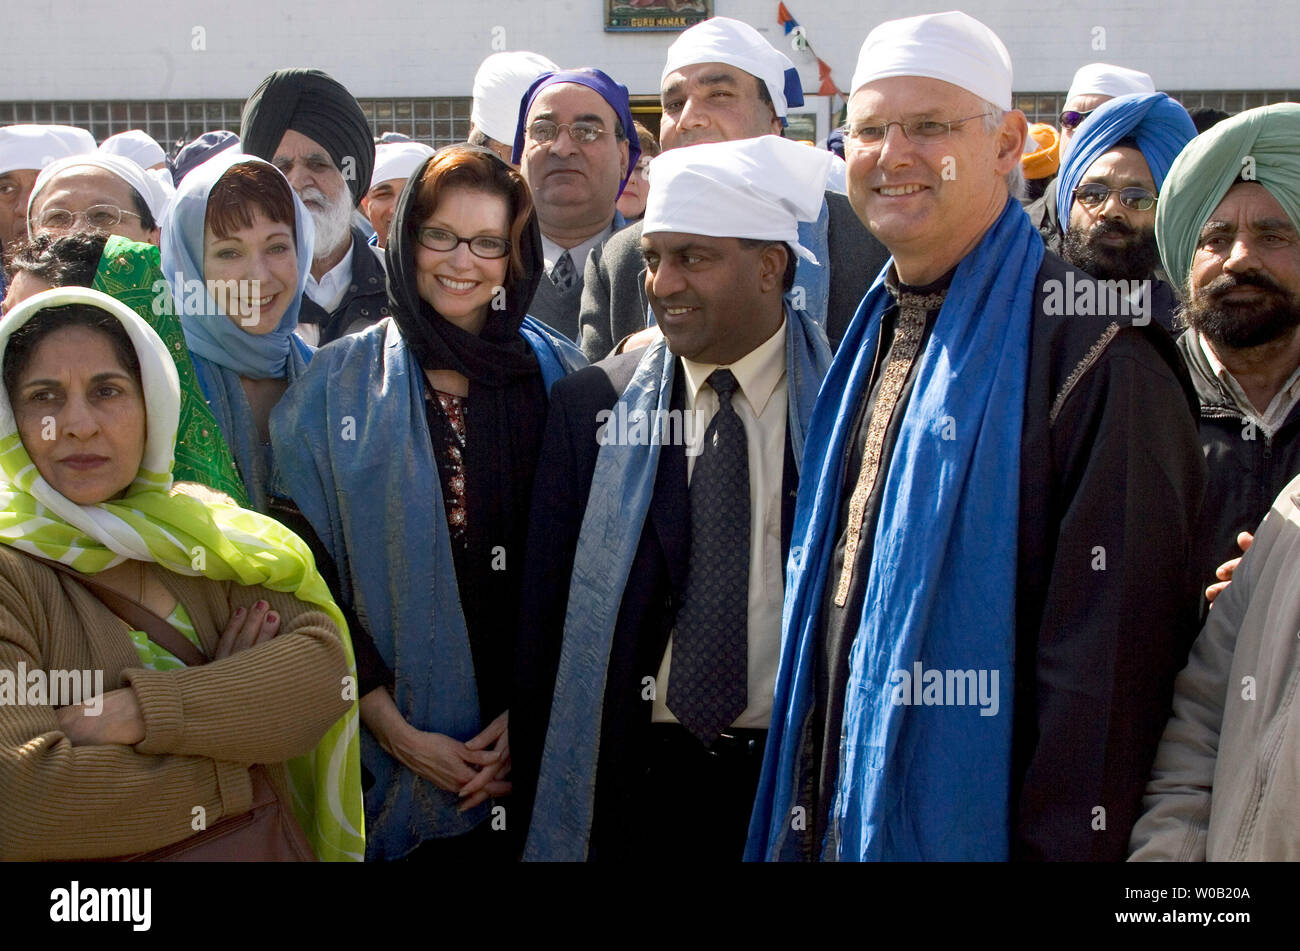 British Columbia (B.C.) Liberal Premier, Gordon Campbell (front with wire rim glasses)stands with star candidate Carol Taylor (front with dark rimmed glasses and black headcover), who recently resigned as chairperson of the Canadian Broadcast Corporation (CBC) to run in the Vancouver-Langara riding during the upcoming provincial election. Both Campbell and Taylor join tens of thousands of Sikhs waiting for the start of the Visakhi Parade from Vancouver's Ross Street Temple, April 16, 2005. One of the largest celebrations of it's kind in North America, Visakhi is the festival of harvest after w Stock Photo